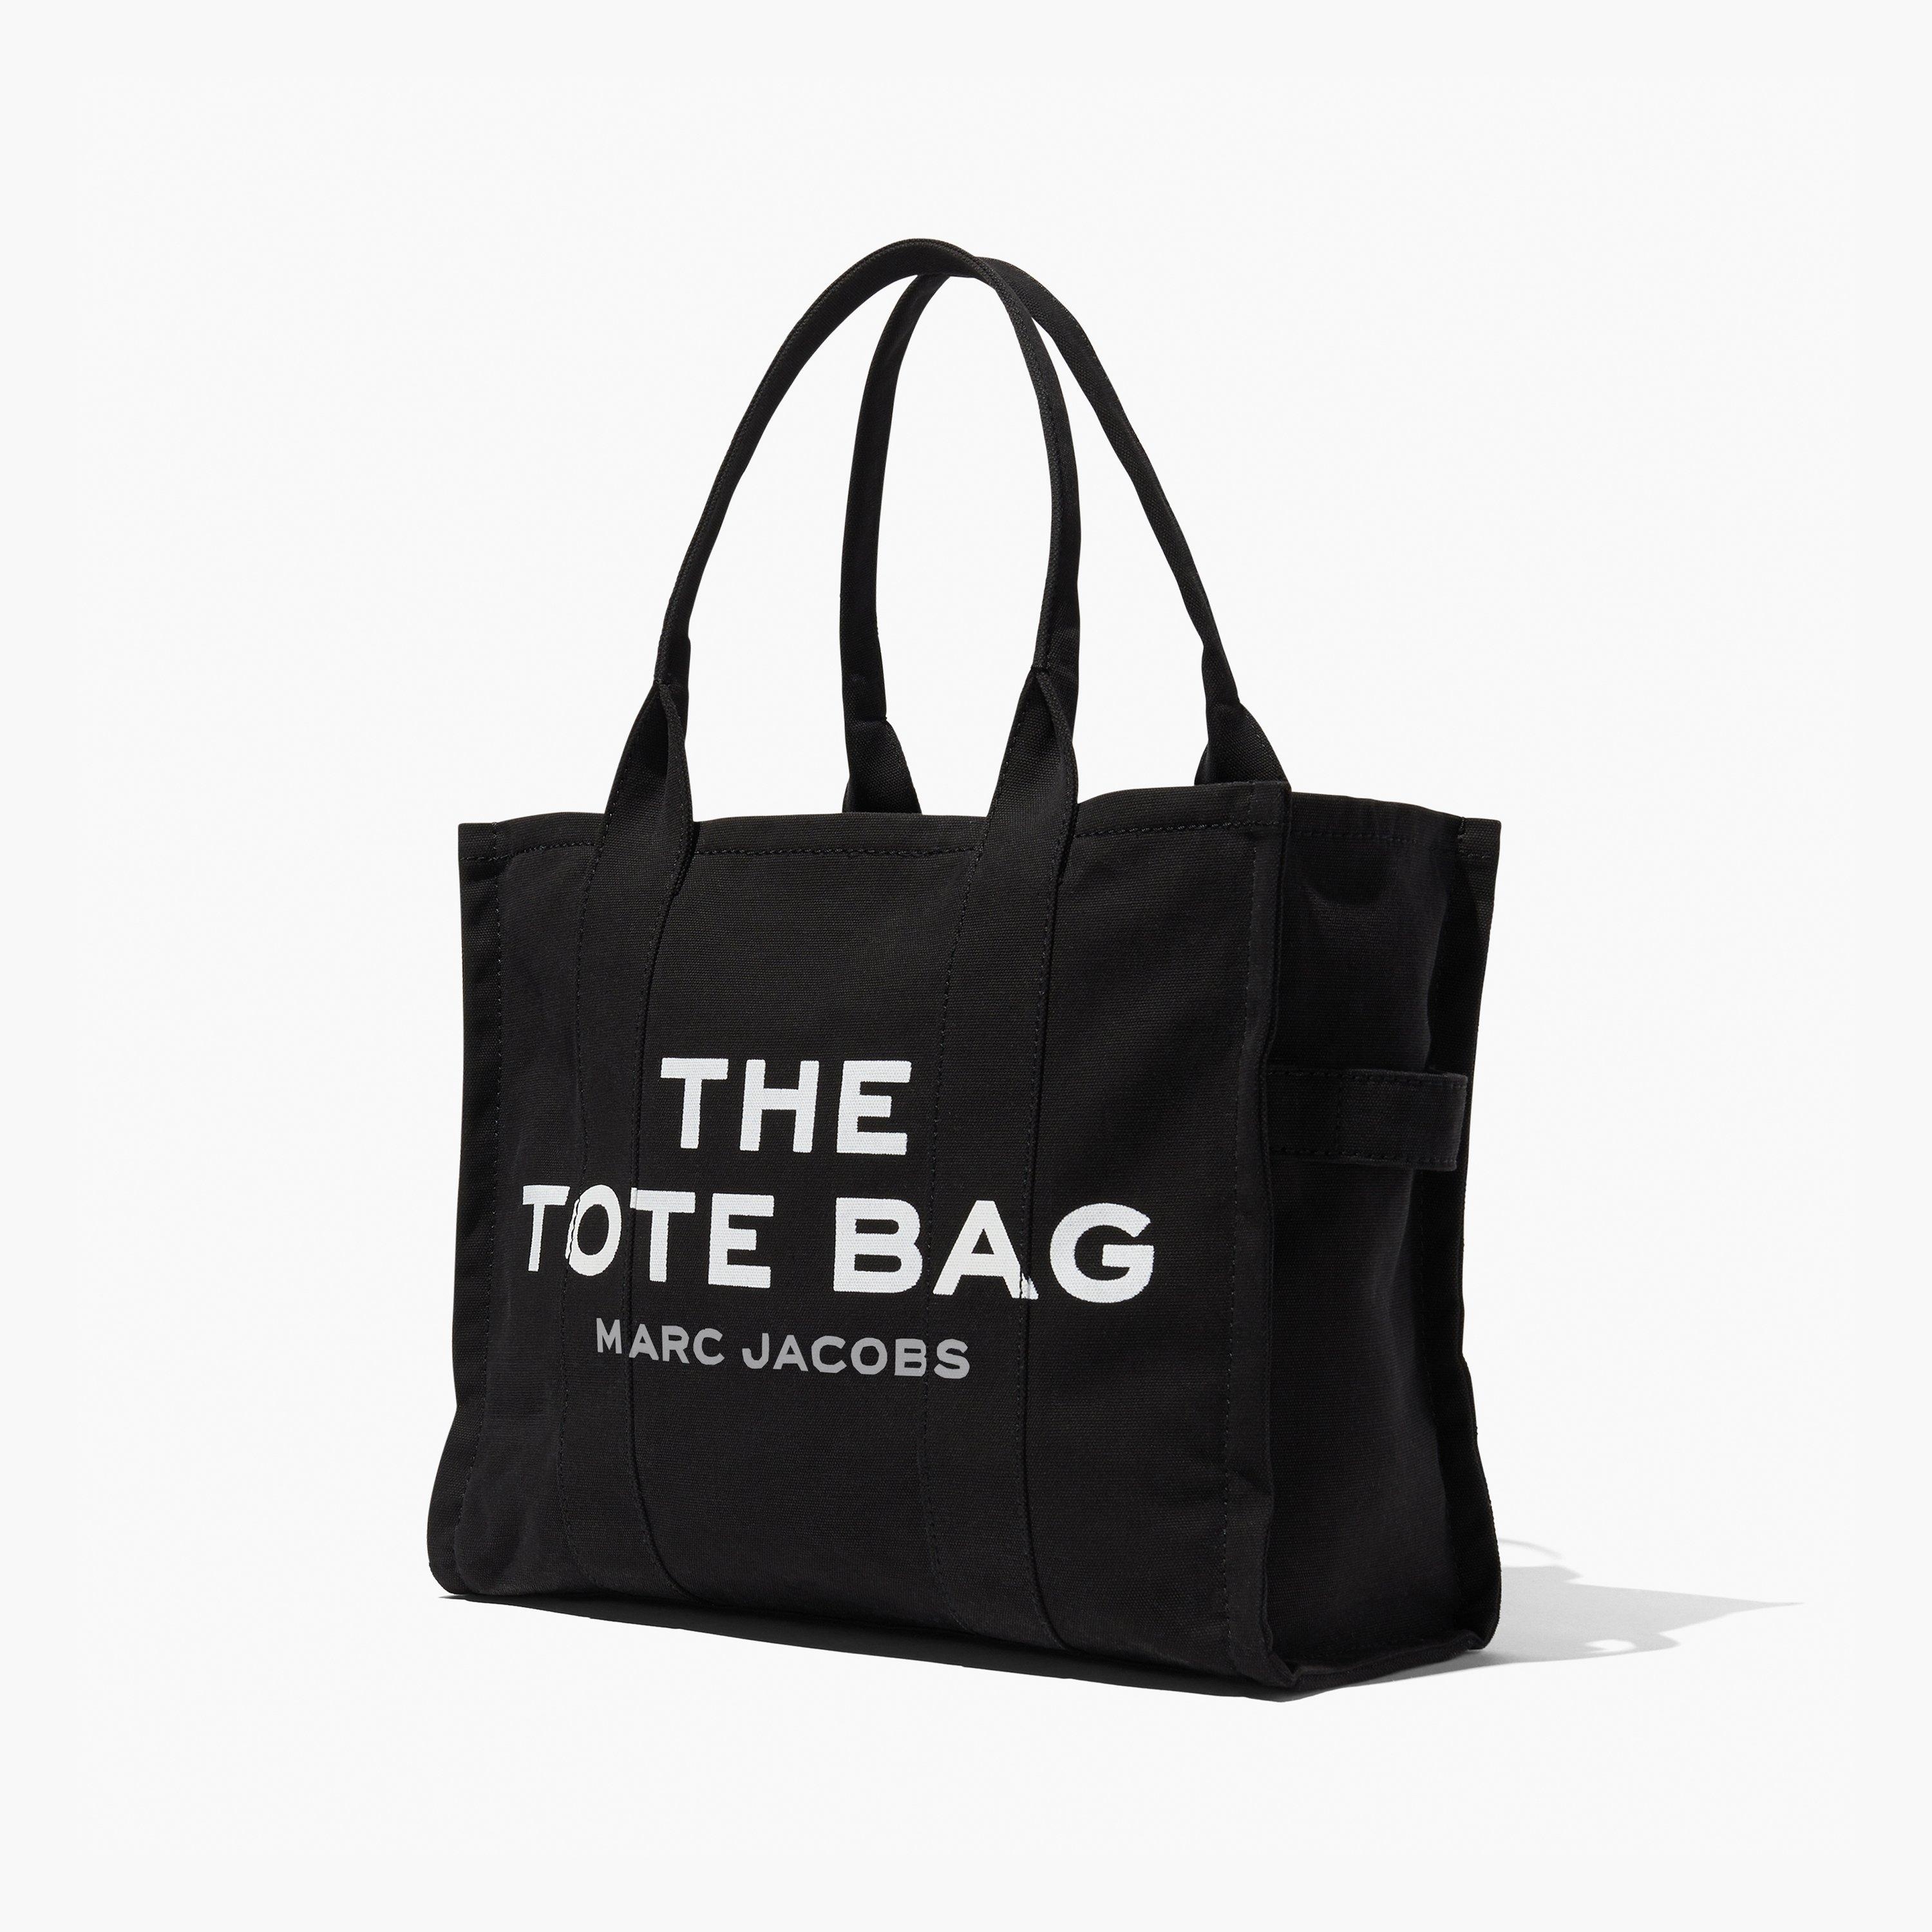 THE LARGE TOTE BAG - 3